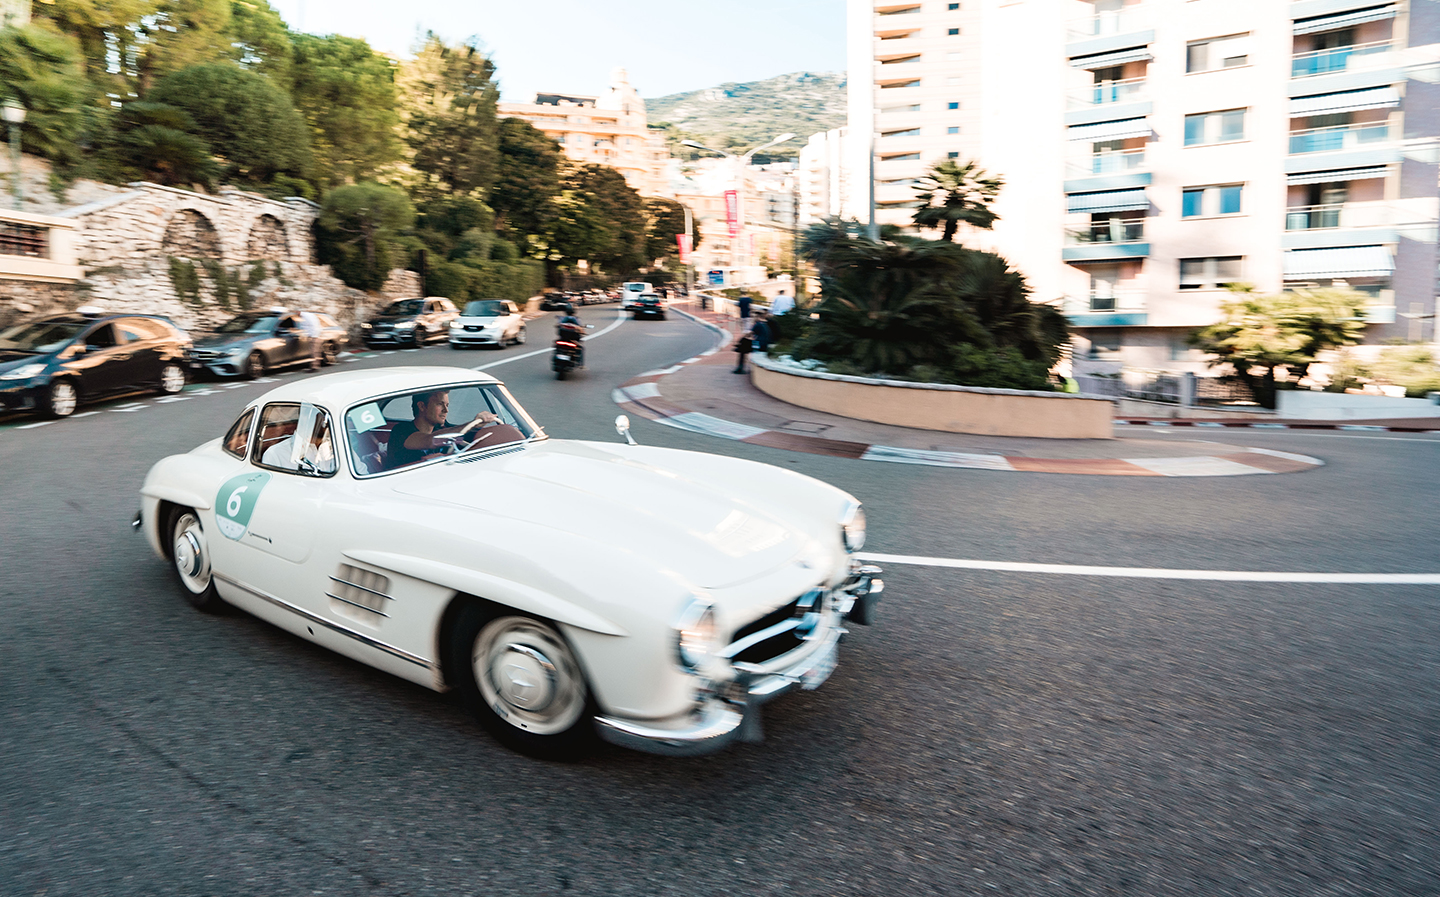 Drivin' with Nico Rosberg rally 2019 - feature by Times Luxx's David Green for Driving.co.uk - Nico Rosberg driving his 300 SL Mercedes at Monaco